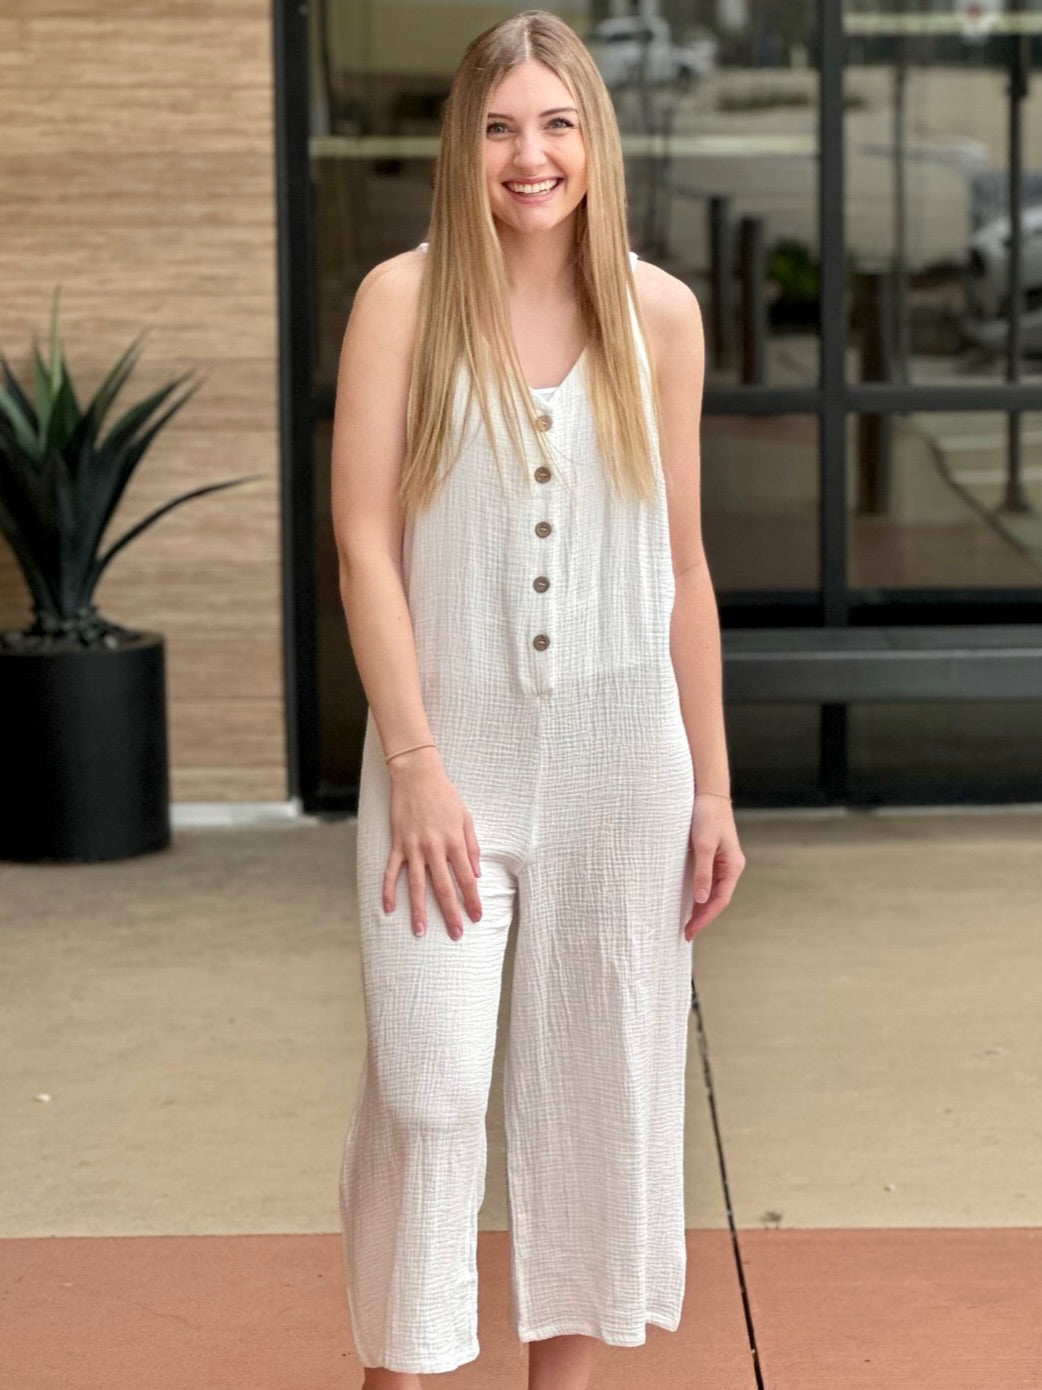 Lexi in off white jumpsuit front view smiling